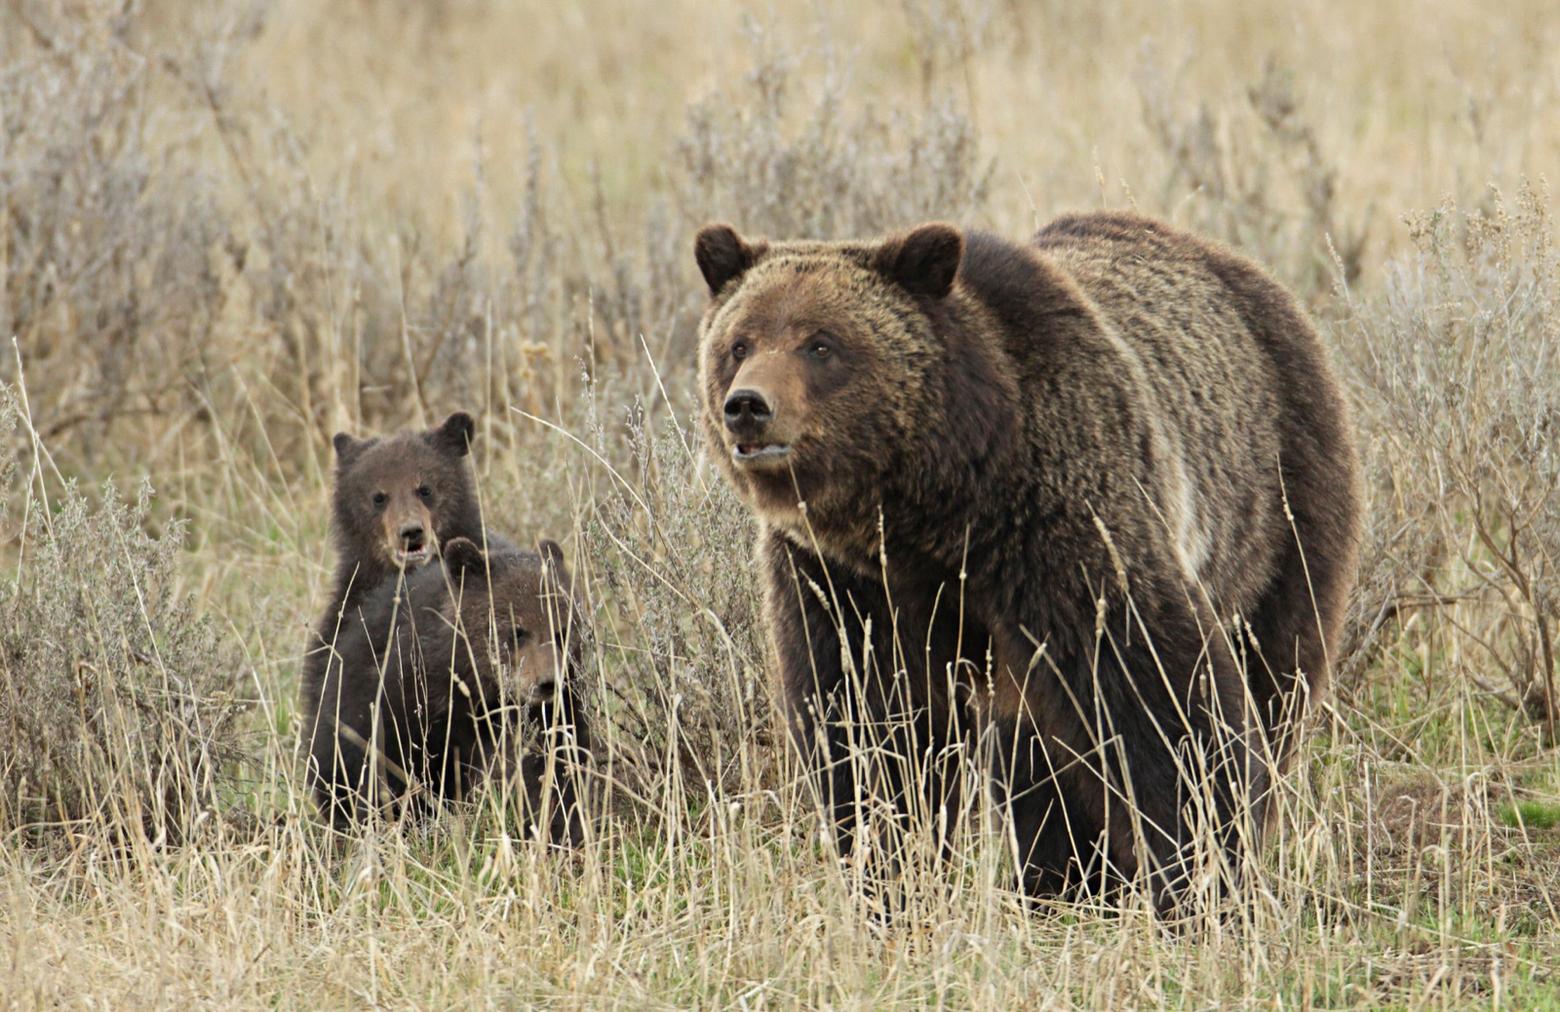 It wasn't so long ago that scientists worried the Greater Yellowstone grizzly population might be lost.  Only through habitat protection and reducing conflicts with people was the downward population trend reversed.  Ironically, on the Custer-Gallatin National Forest's own webpage a photo of a grizzly bear is featured along with this acknowledgment:  "Bears do not like surprises."  Scientists warn that mountain bikers, because of the travel speeds of pedalers, represent a threat to grizzly habitat security. If enough mountain bikers ride in certain areas, they fear, it could result in displacement of bears.  Photo courtesy Jim Peaco/Yellowstone National Park